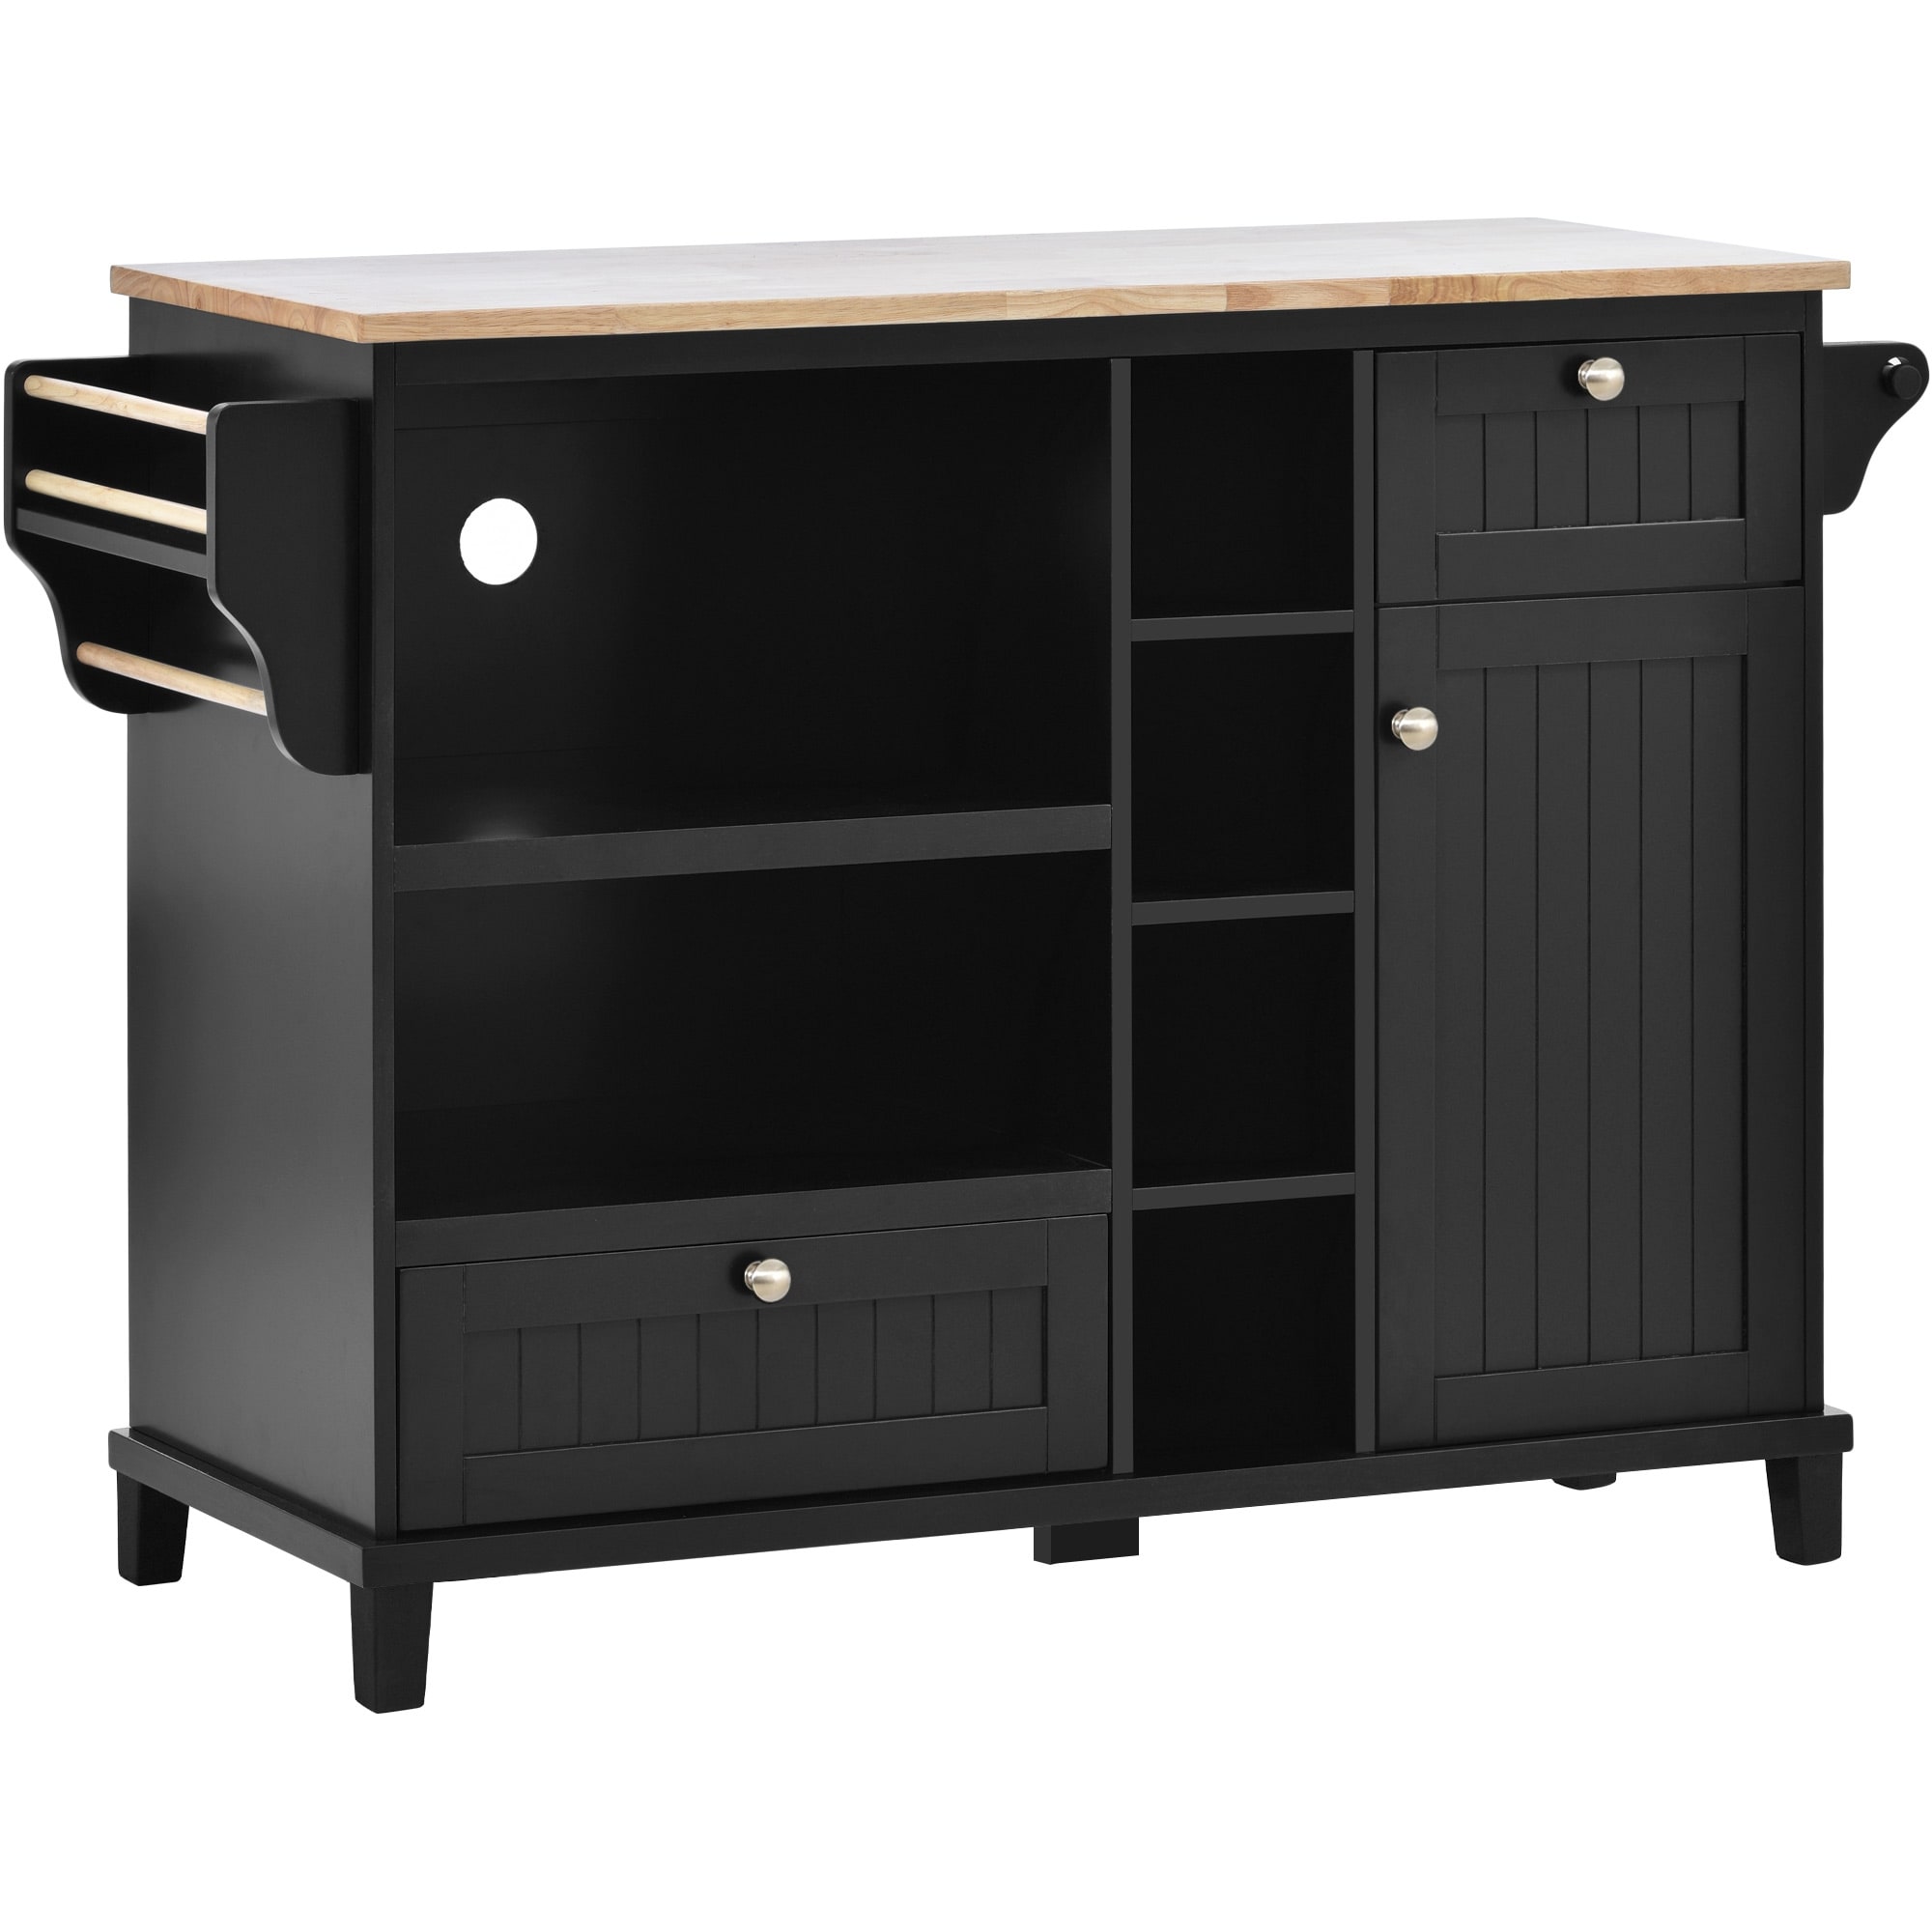 Kitchen Island Cart with Storage Cabinet and Two Locking Wheels